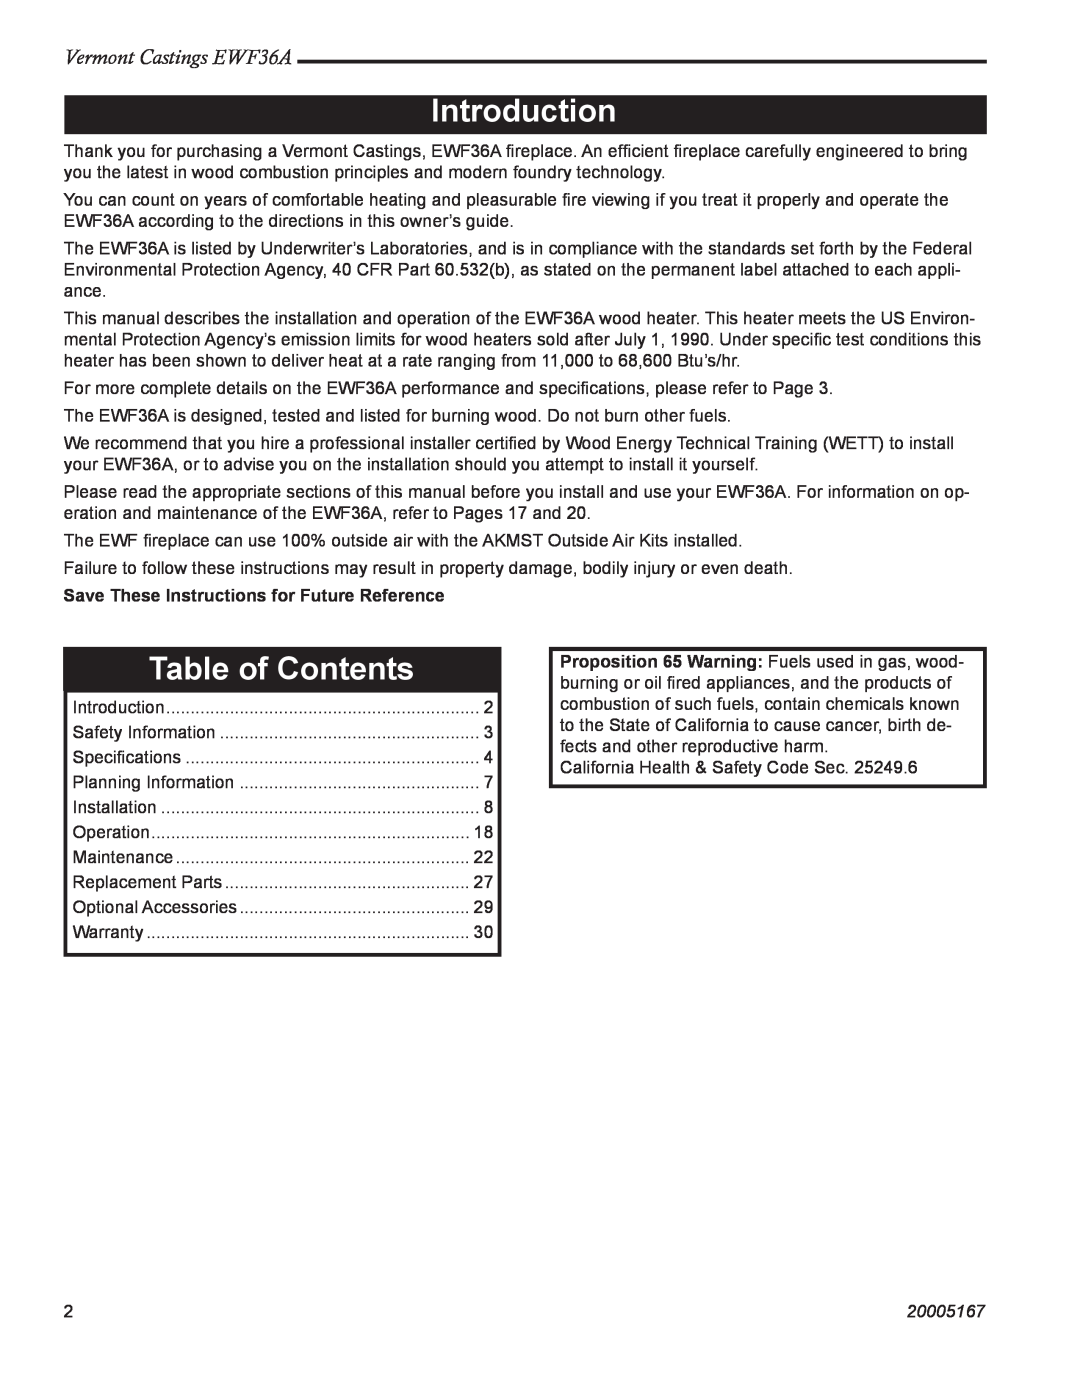 Vermont Casting Introduction, Table of Contents, Vermont Castings EWF36A, Save These Instructions for Future Reference 